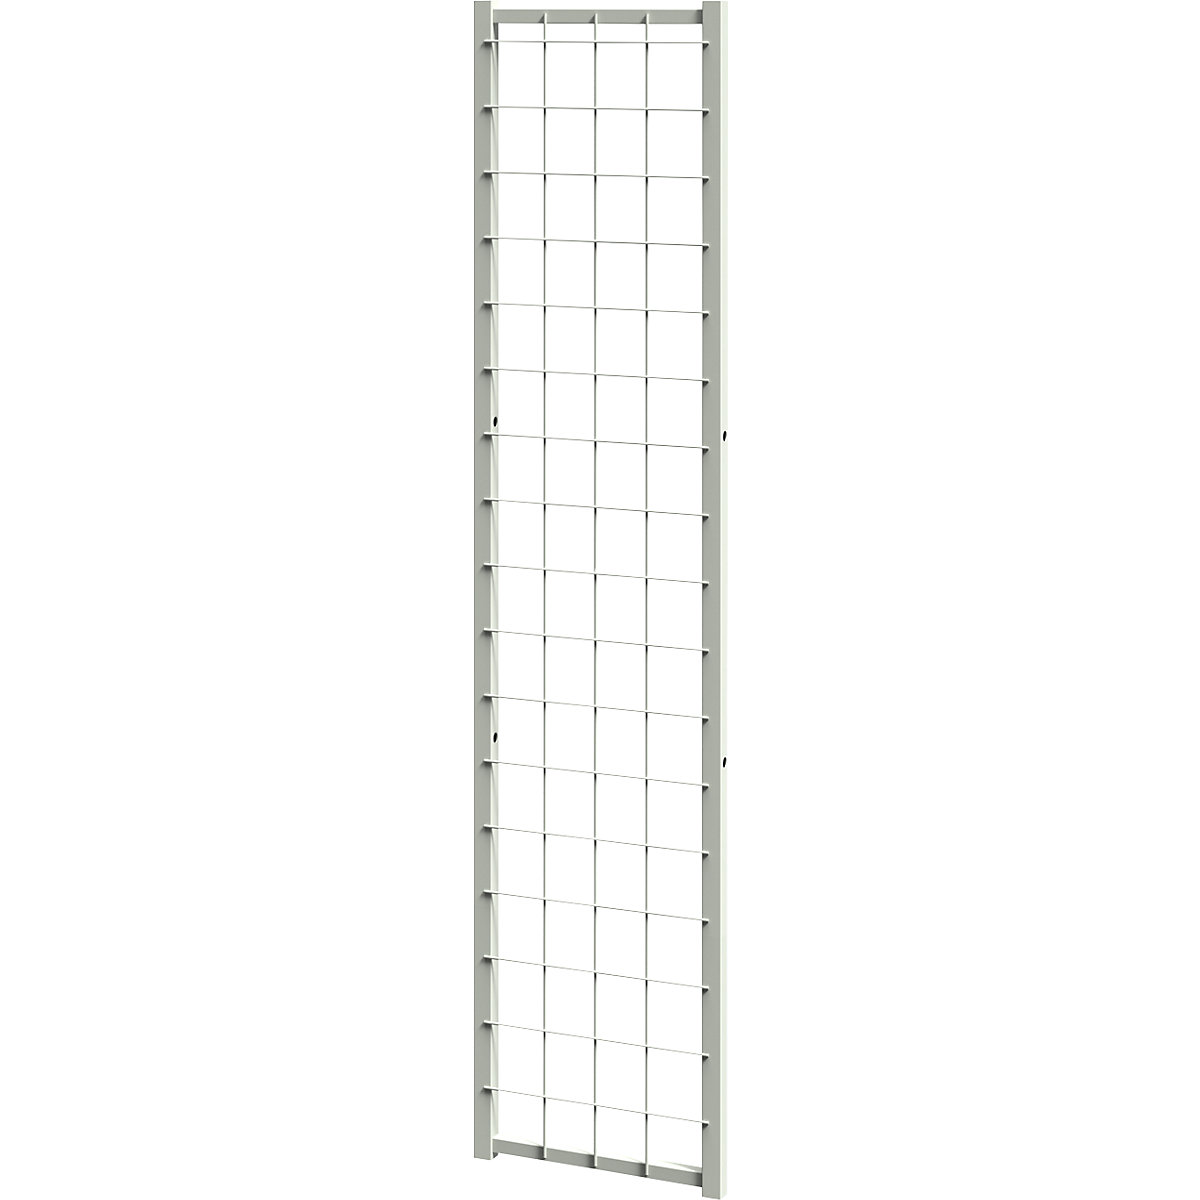 X-STORE 2.0 partition system, wall section – Axelent, height 1100 mm, width 250 mm-4